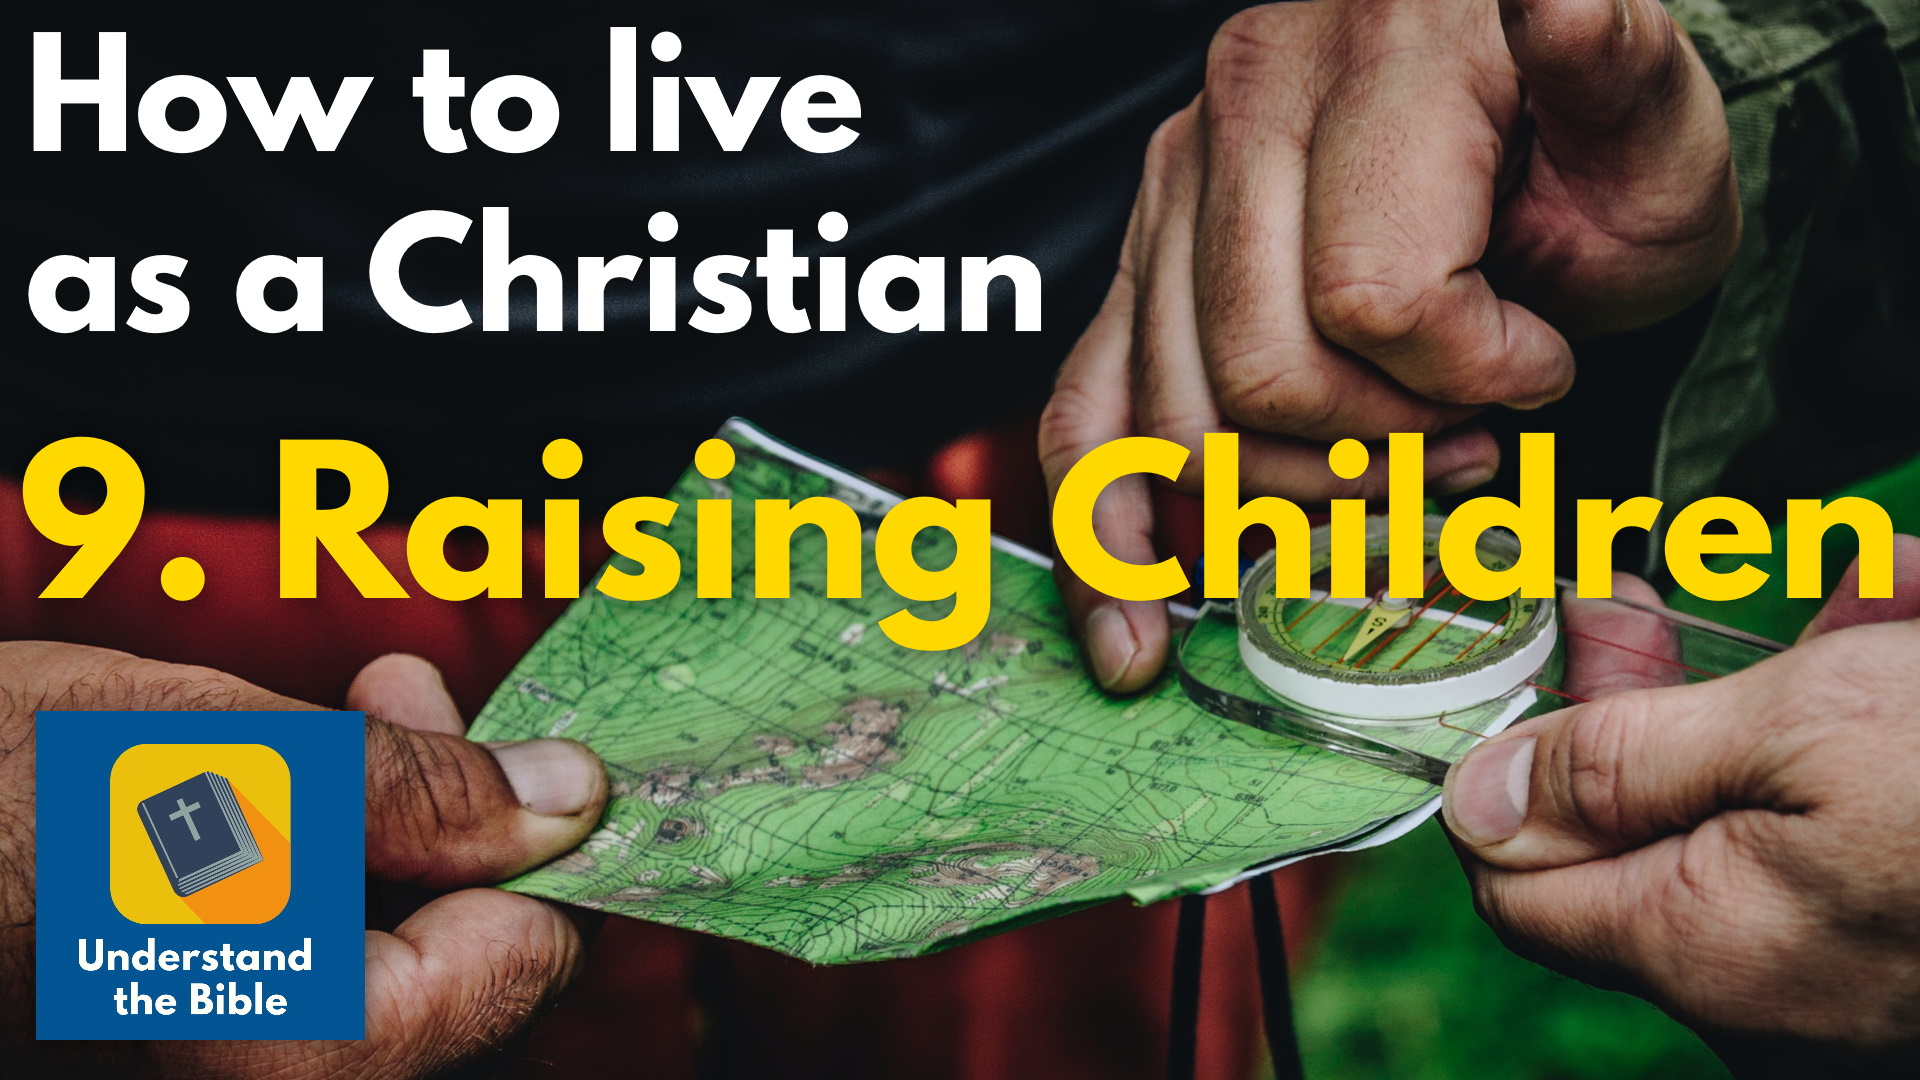 Raising Children: Final part of How to Live as a Christian course